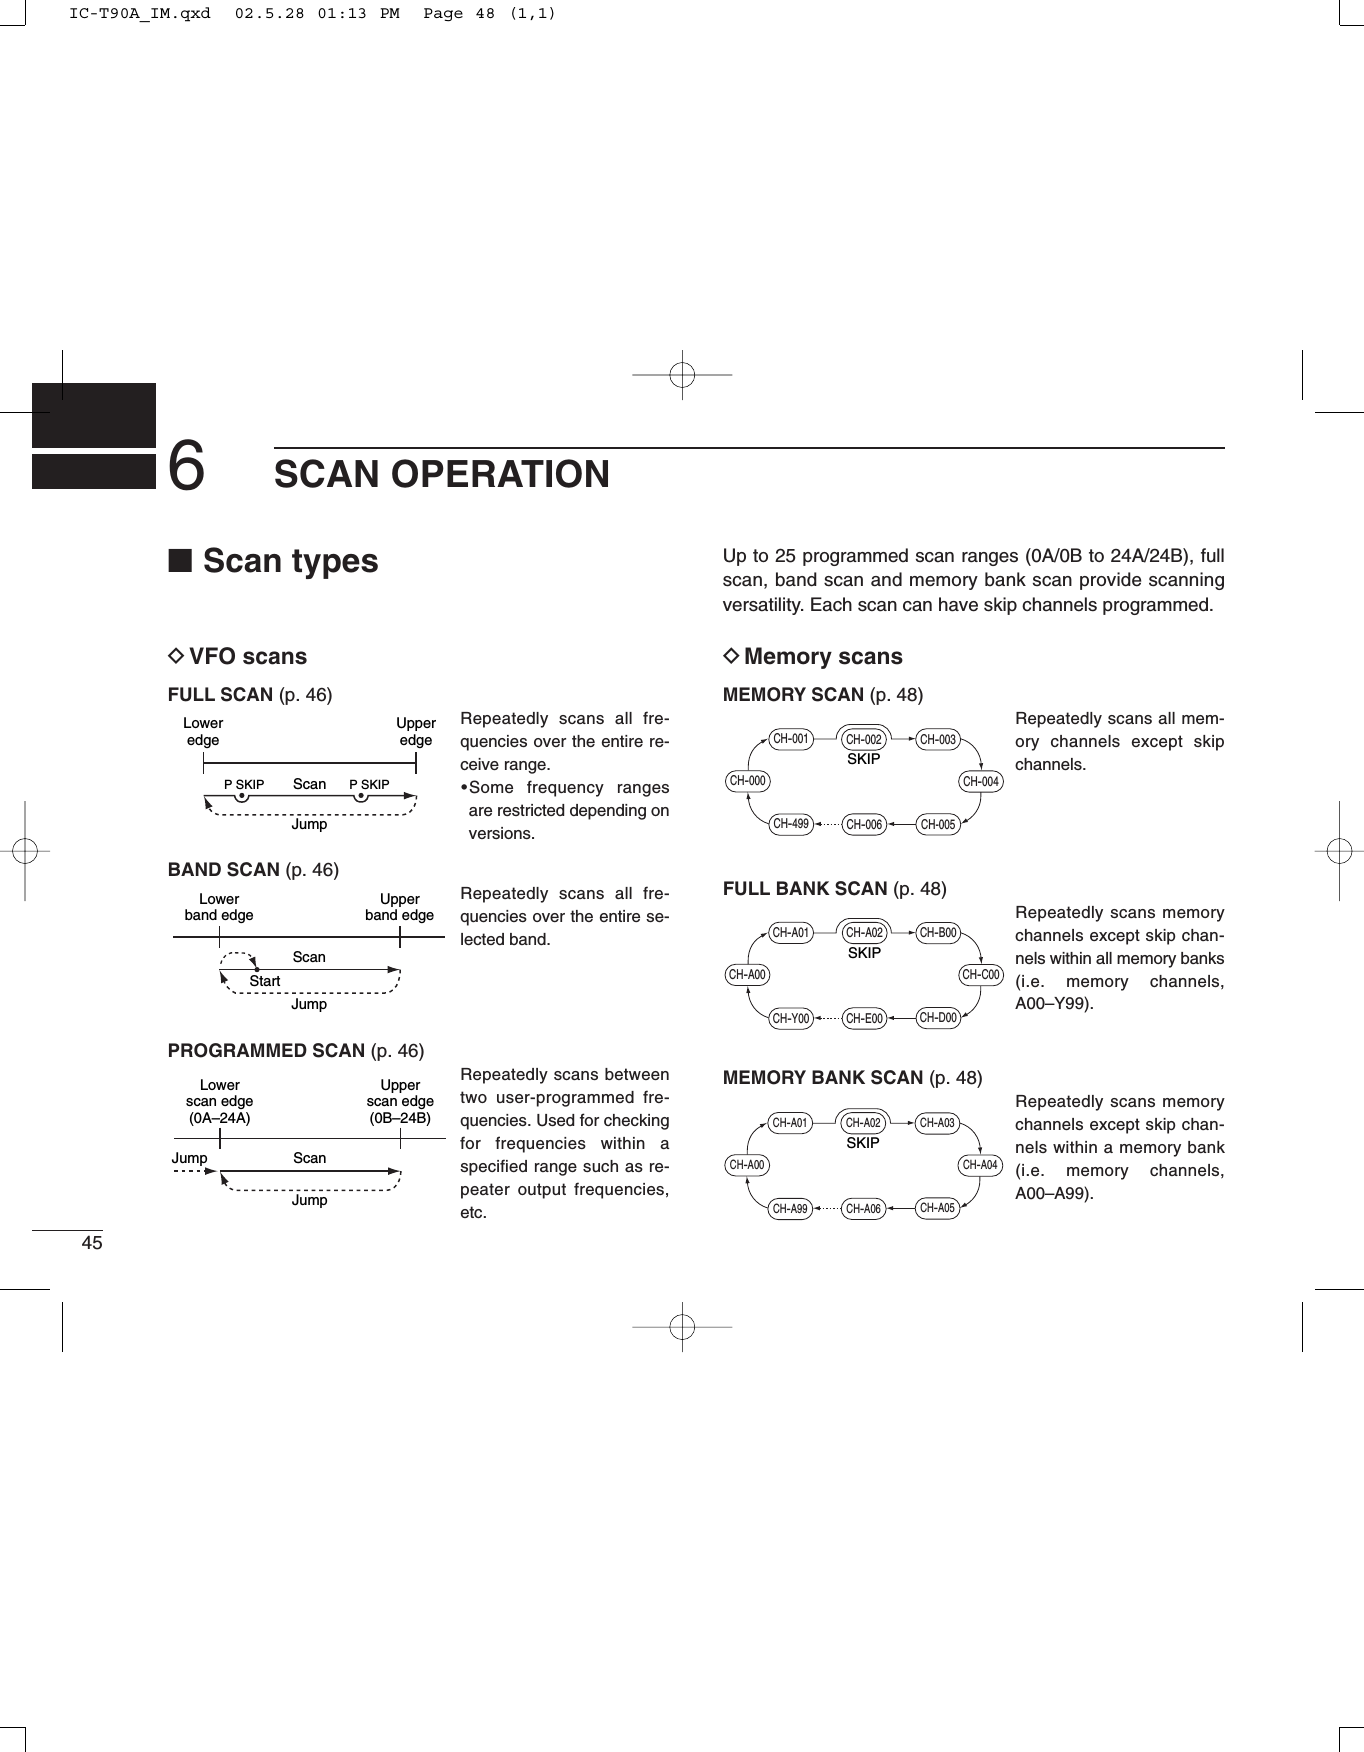 456SCAN OPERATION■Scan types Up to 25 programmed scan ranges (0A/0B to 24A/24B), fullscan, band scan and memory bank scan provide scanningversatility. Each scan can have skip channels programmed.DVFO scansFULL SCAN (p. 46)Repeatedly scans all fre-quencies over the entire re-ceive range.•Some frequency rangesare restricted depending onversions.BAND SCAN (p. 46)Repeatedly scans all fre-quencies over the entire se-lected band.PROGRAMMED SCAN (p. 46)Repeatedly scans betweentwo user-programmed fre-quencies. Used for checkingfor frequencies within aspecified range such as re-peater output frequencies,etc.DMemory scansMEMORY SCAN (p. 48)Repeatedly scans all mem-ory channels except skipchannels.FULL BANK SCAN (p. 48)Repeatedly scans memorychannels except skip chan-nels within all memory banks(i.e. memory channels,A00–Y99).MEMORY BANK SCAN (p. 48)Repeatedly scans memorychannels except skip chan-nels within a memory bank(i.e. memory channels,A00–A99).CH-A00CH-A01 CH-A02 CH-A03CH-A04CH-A05CH-A06CH-A99SKIPCH-A00CH-A01 CH-A02 CH-B00CH-C00CH-D00CH-E00CH-Y00SKIPCH-000CH-001 CH-002 CH-003CH-004CH-005CH-006CH-499SKIPJumpLowerscan edge(0A–24A)Upperscan edge(0B–24B)ScanJumpLowerband edgeUpperband edgeScanJumpStartLoweredgeUpperedgeScanJumpP SKIPP SKIPIC-T90A_IM.qxd  02.5.28 01:13 PM  Page 48 (1,1)